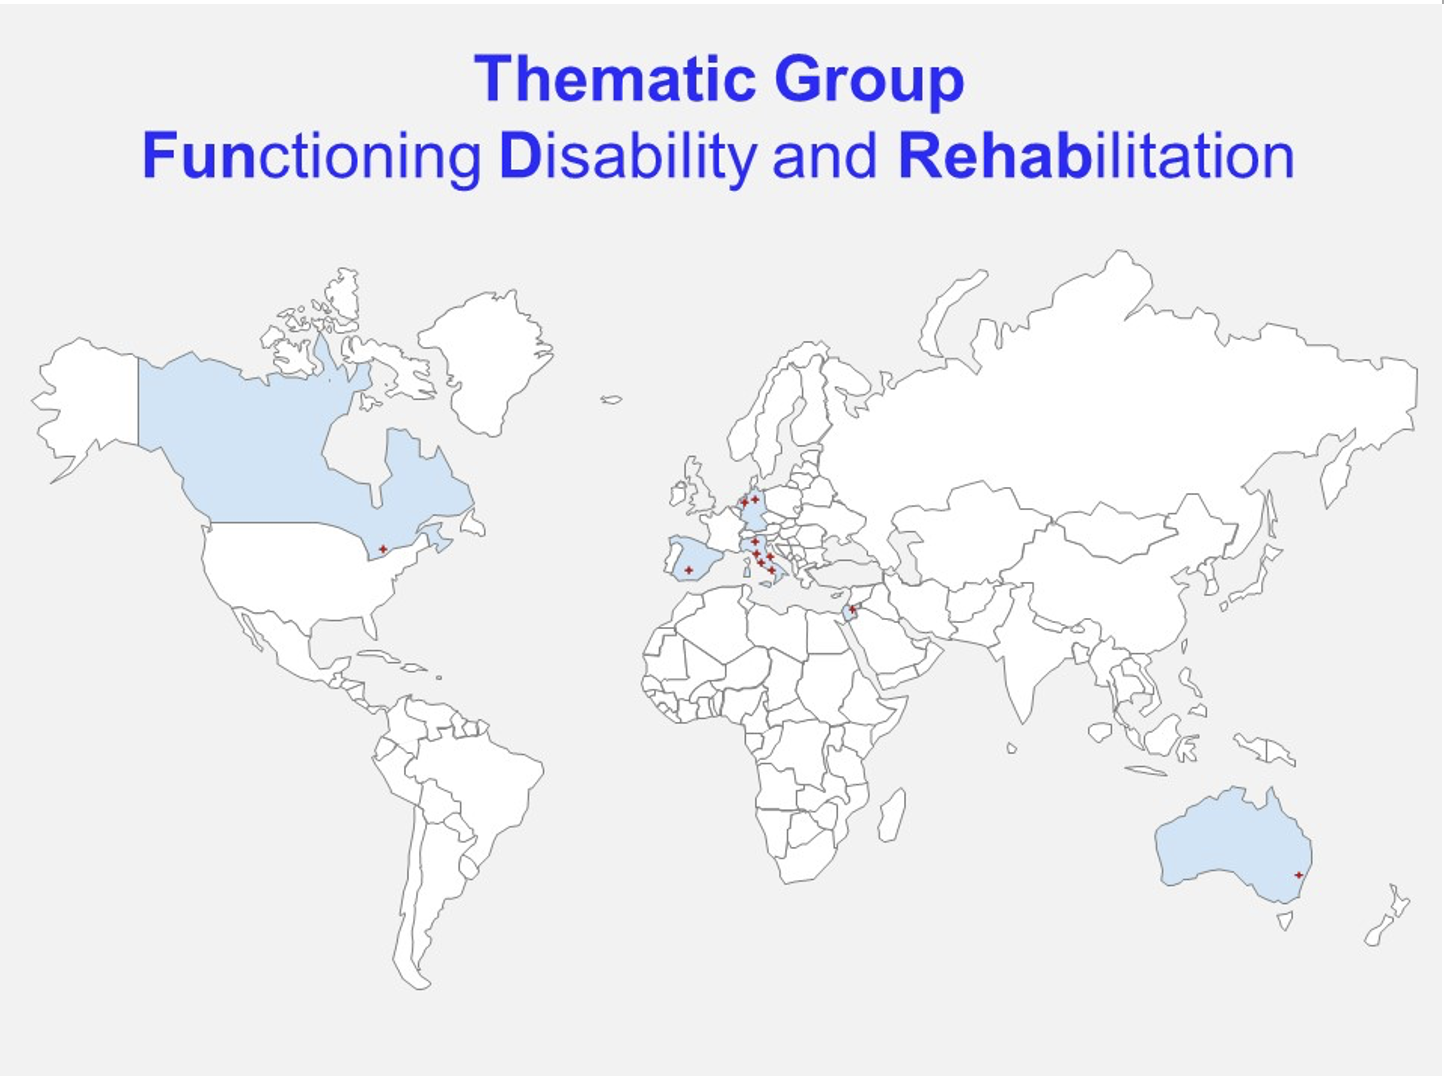 Map of Cochrane Rehabilitation proposed Thematic Group